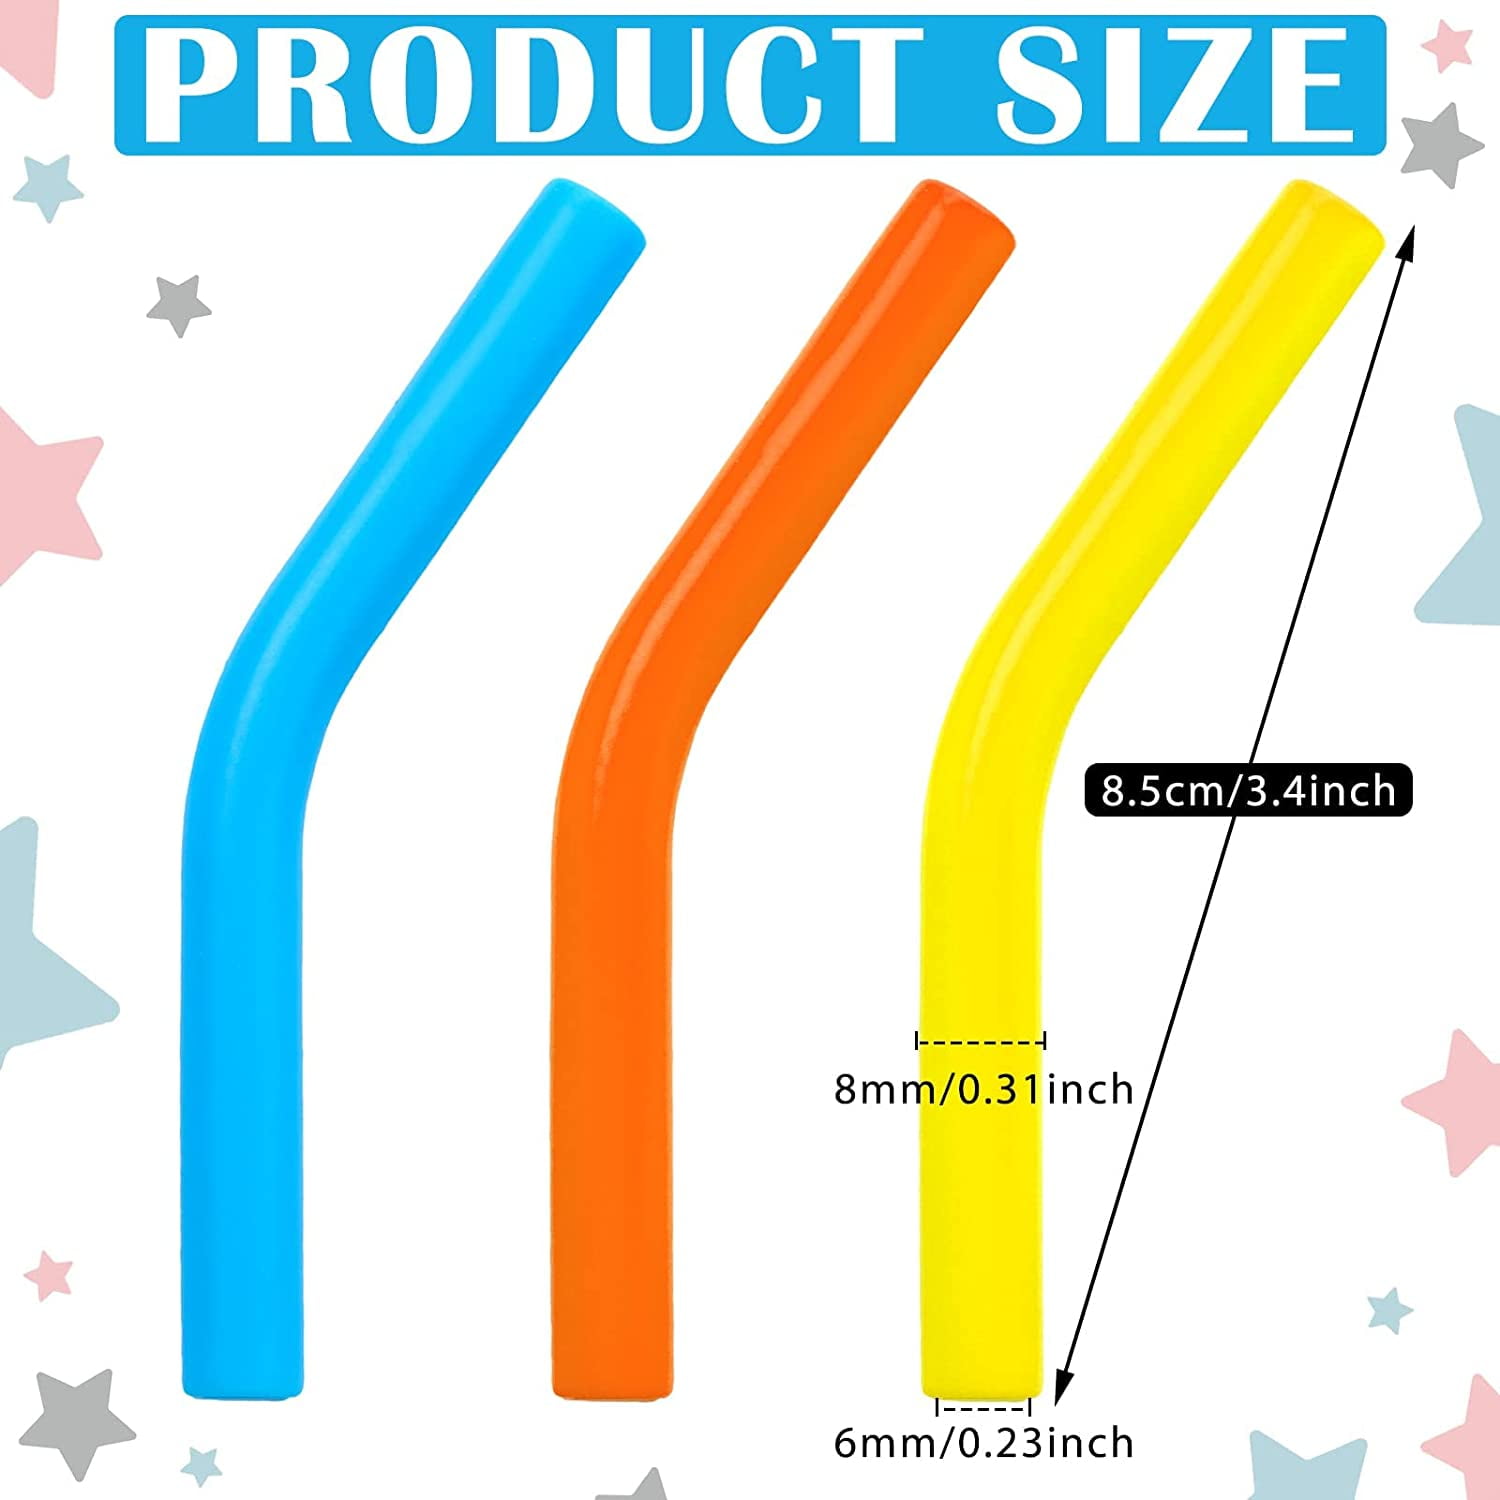 8 PCS Silicone Straw Tips, Multi Colored Straws Nozzles Covers, Reusable  Metal Straws Covers Fit for 14 Inch Wide(6MM Outer Diameter) Stainless  Steel Straws